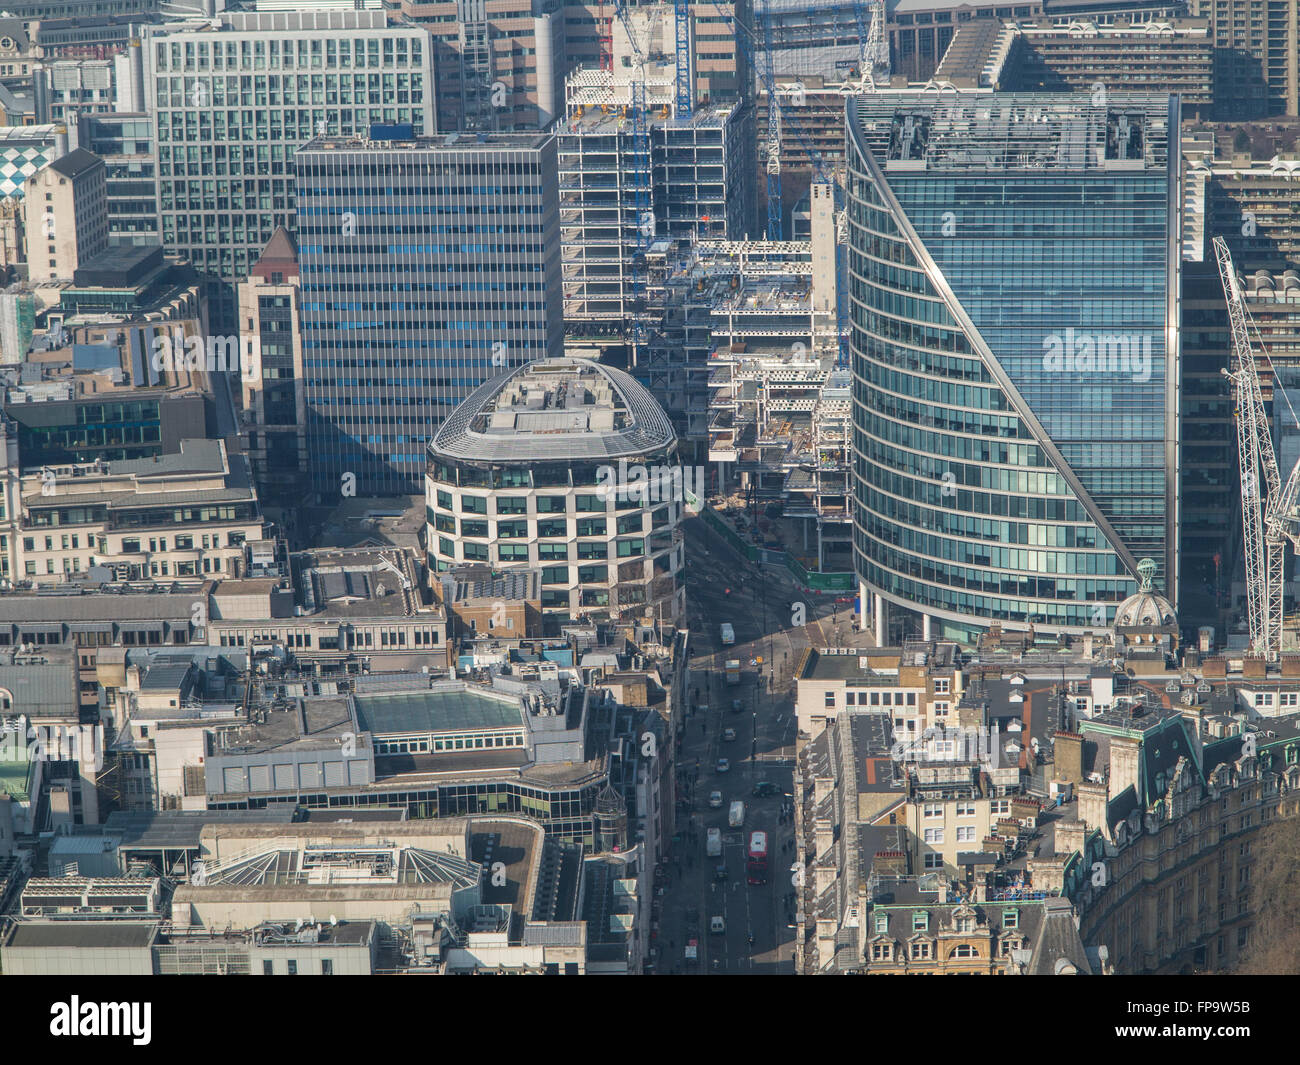 Aerial view of the City of London Stock Photo